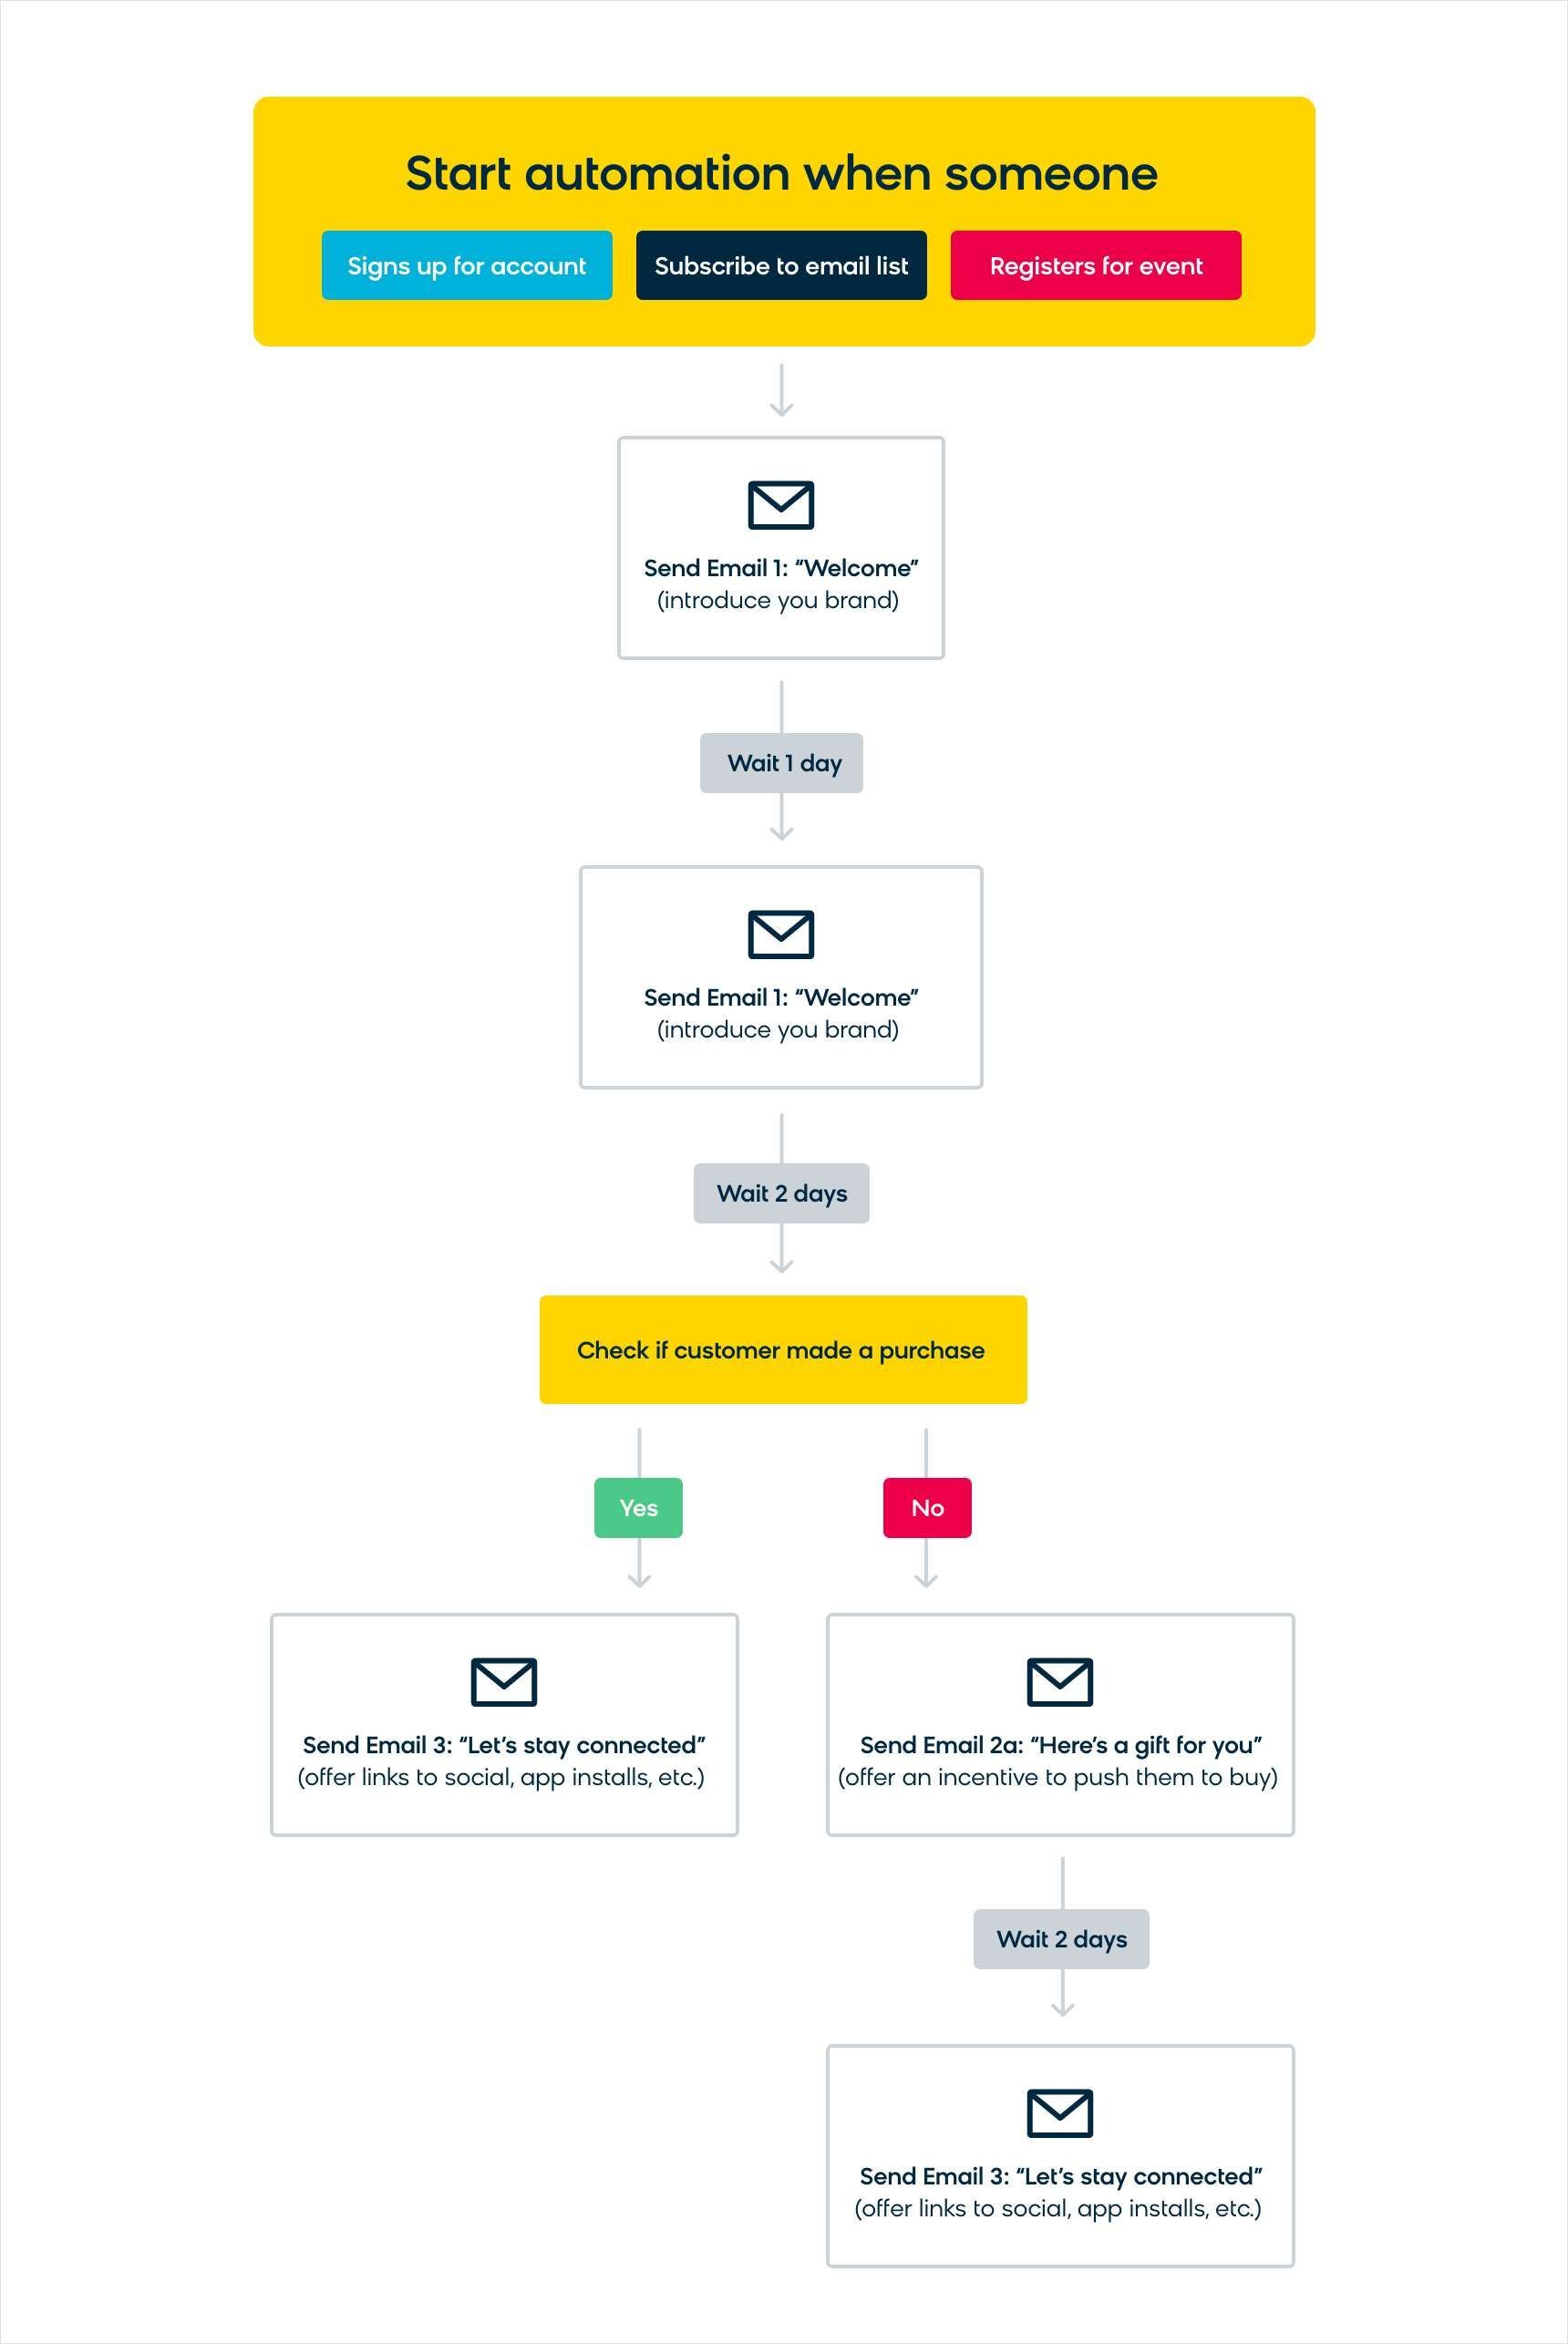 The workflow of an automated welcome email series, an easy way to start journey orchestration